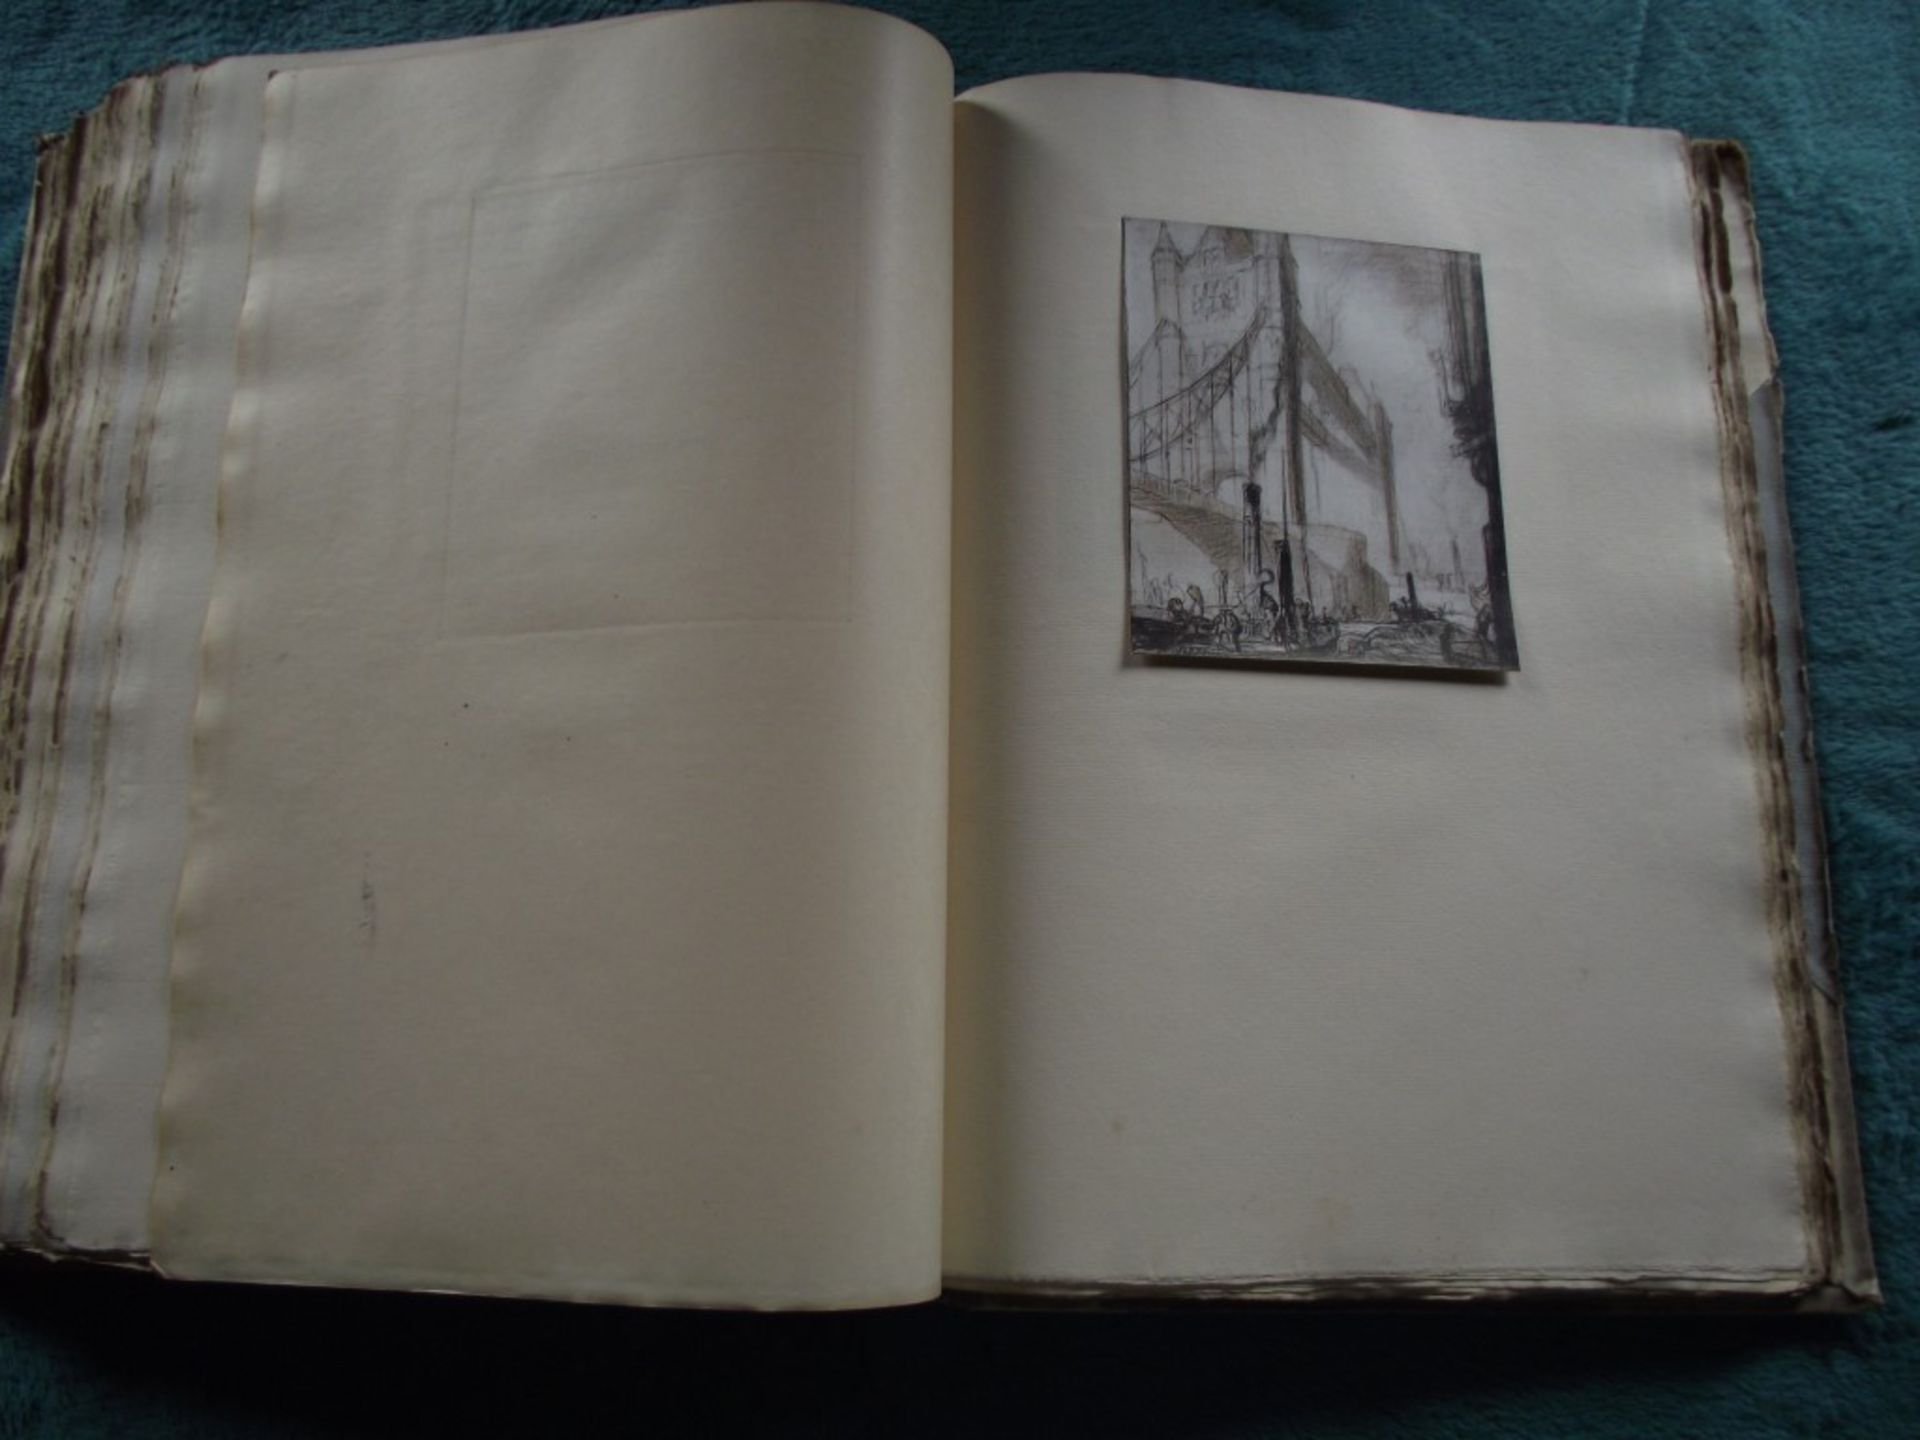 A Book of Bridges by Frank Brangwyn & Walter Shaw Sparrow - Ltd. Edit. 17/75 with Signed Lithograph. - Image 55 of 64